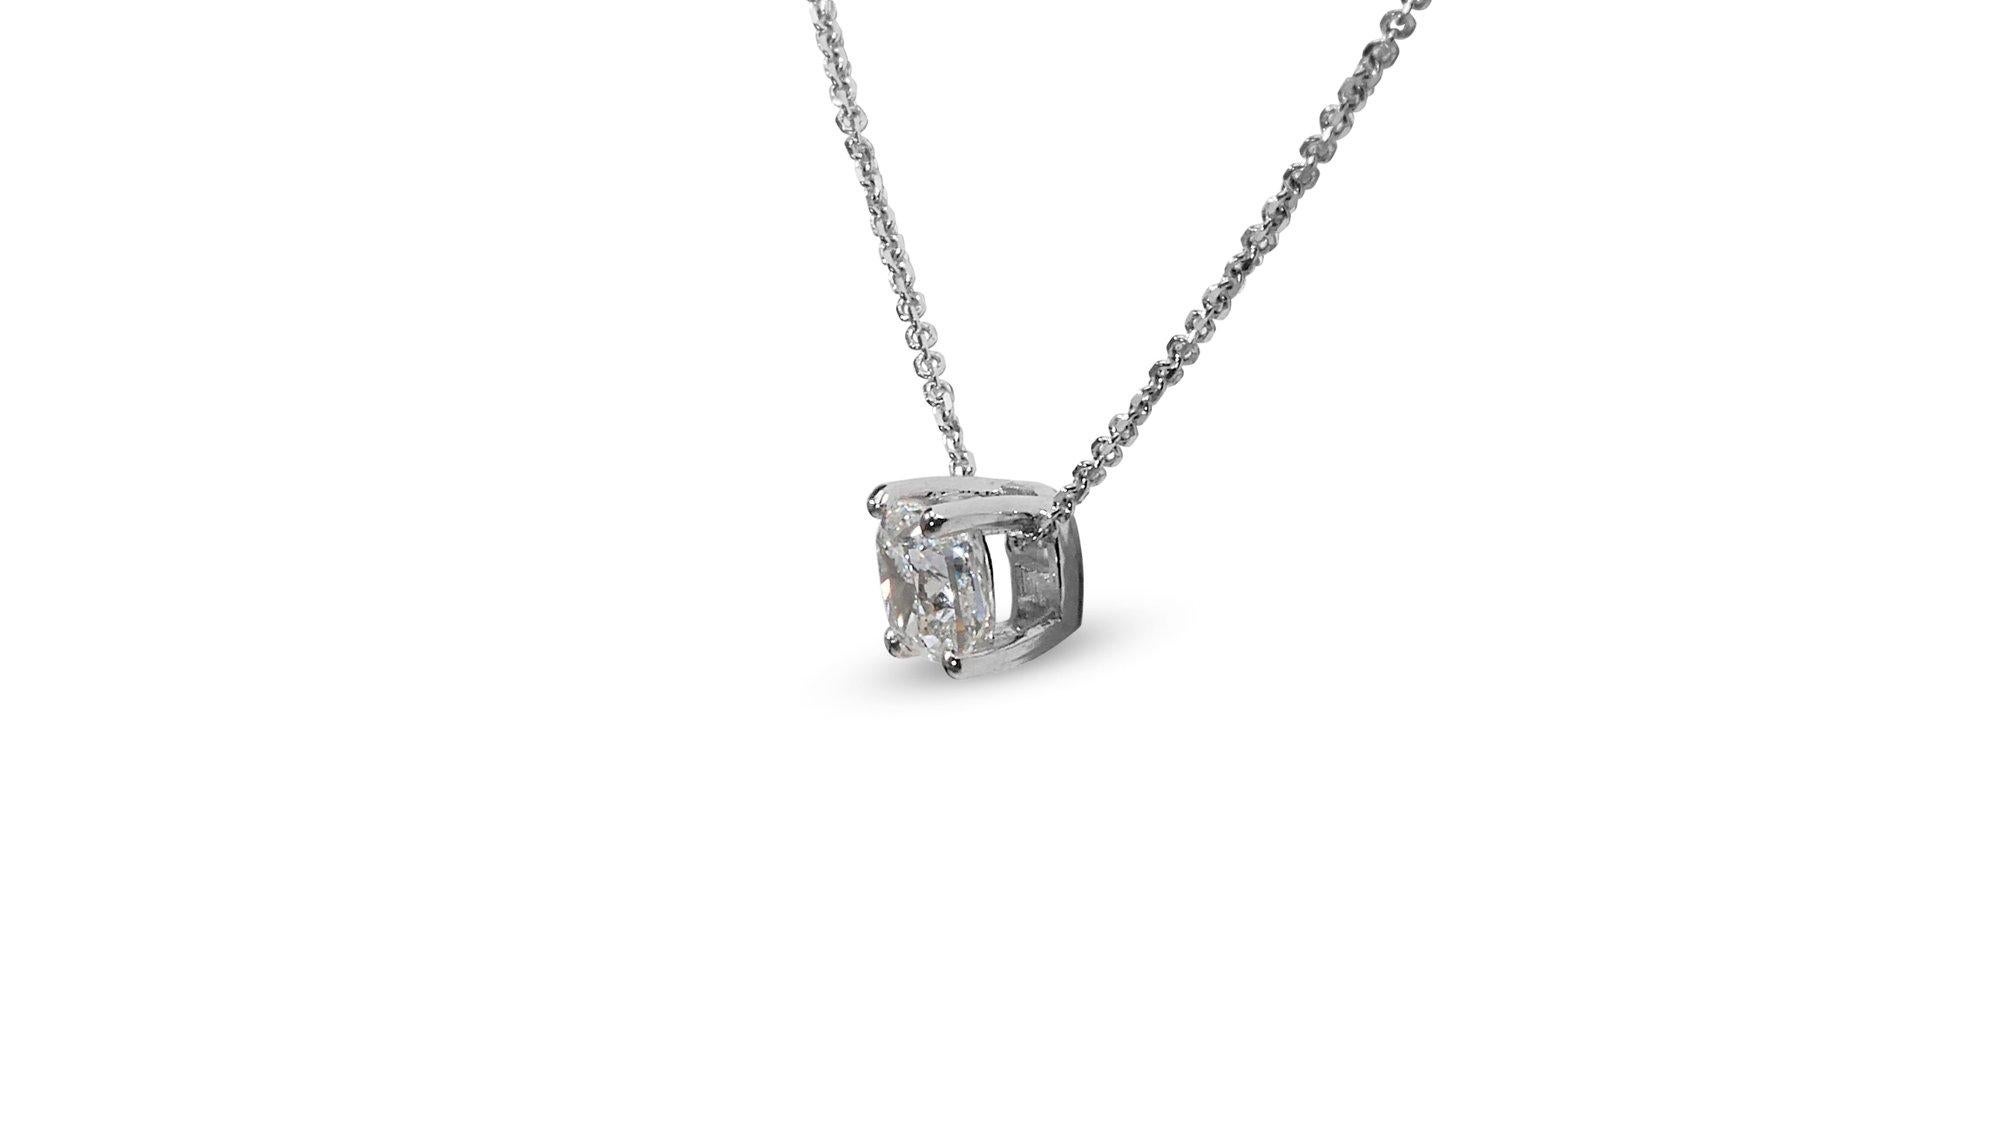 Elegant 1.51ct Cushion Diamond Solitaire Necklace in 18k White Gold - GIA  For Sale 1